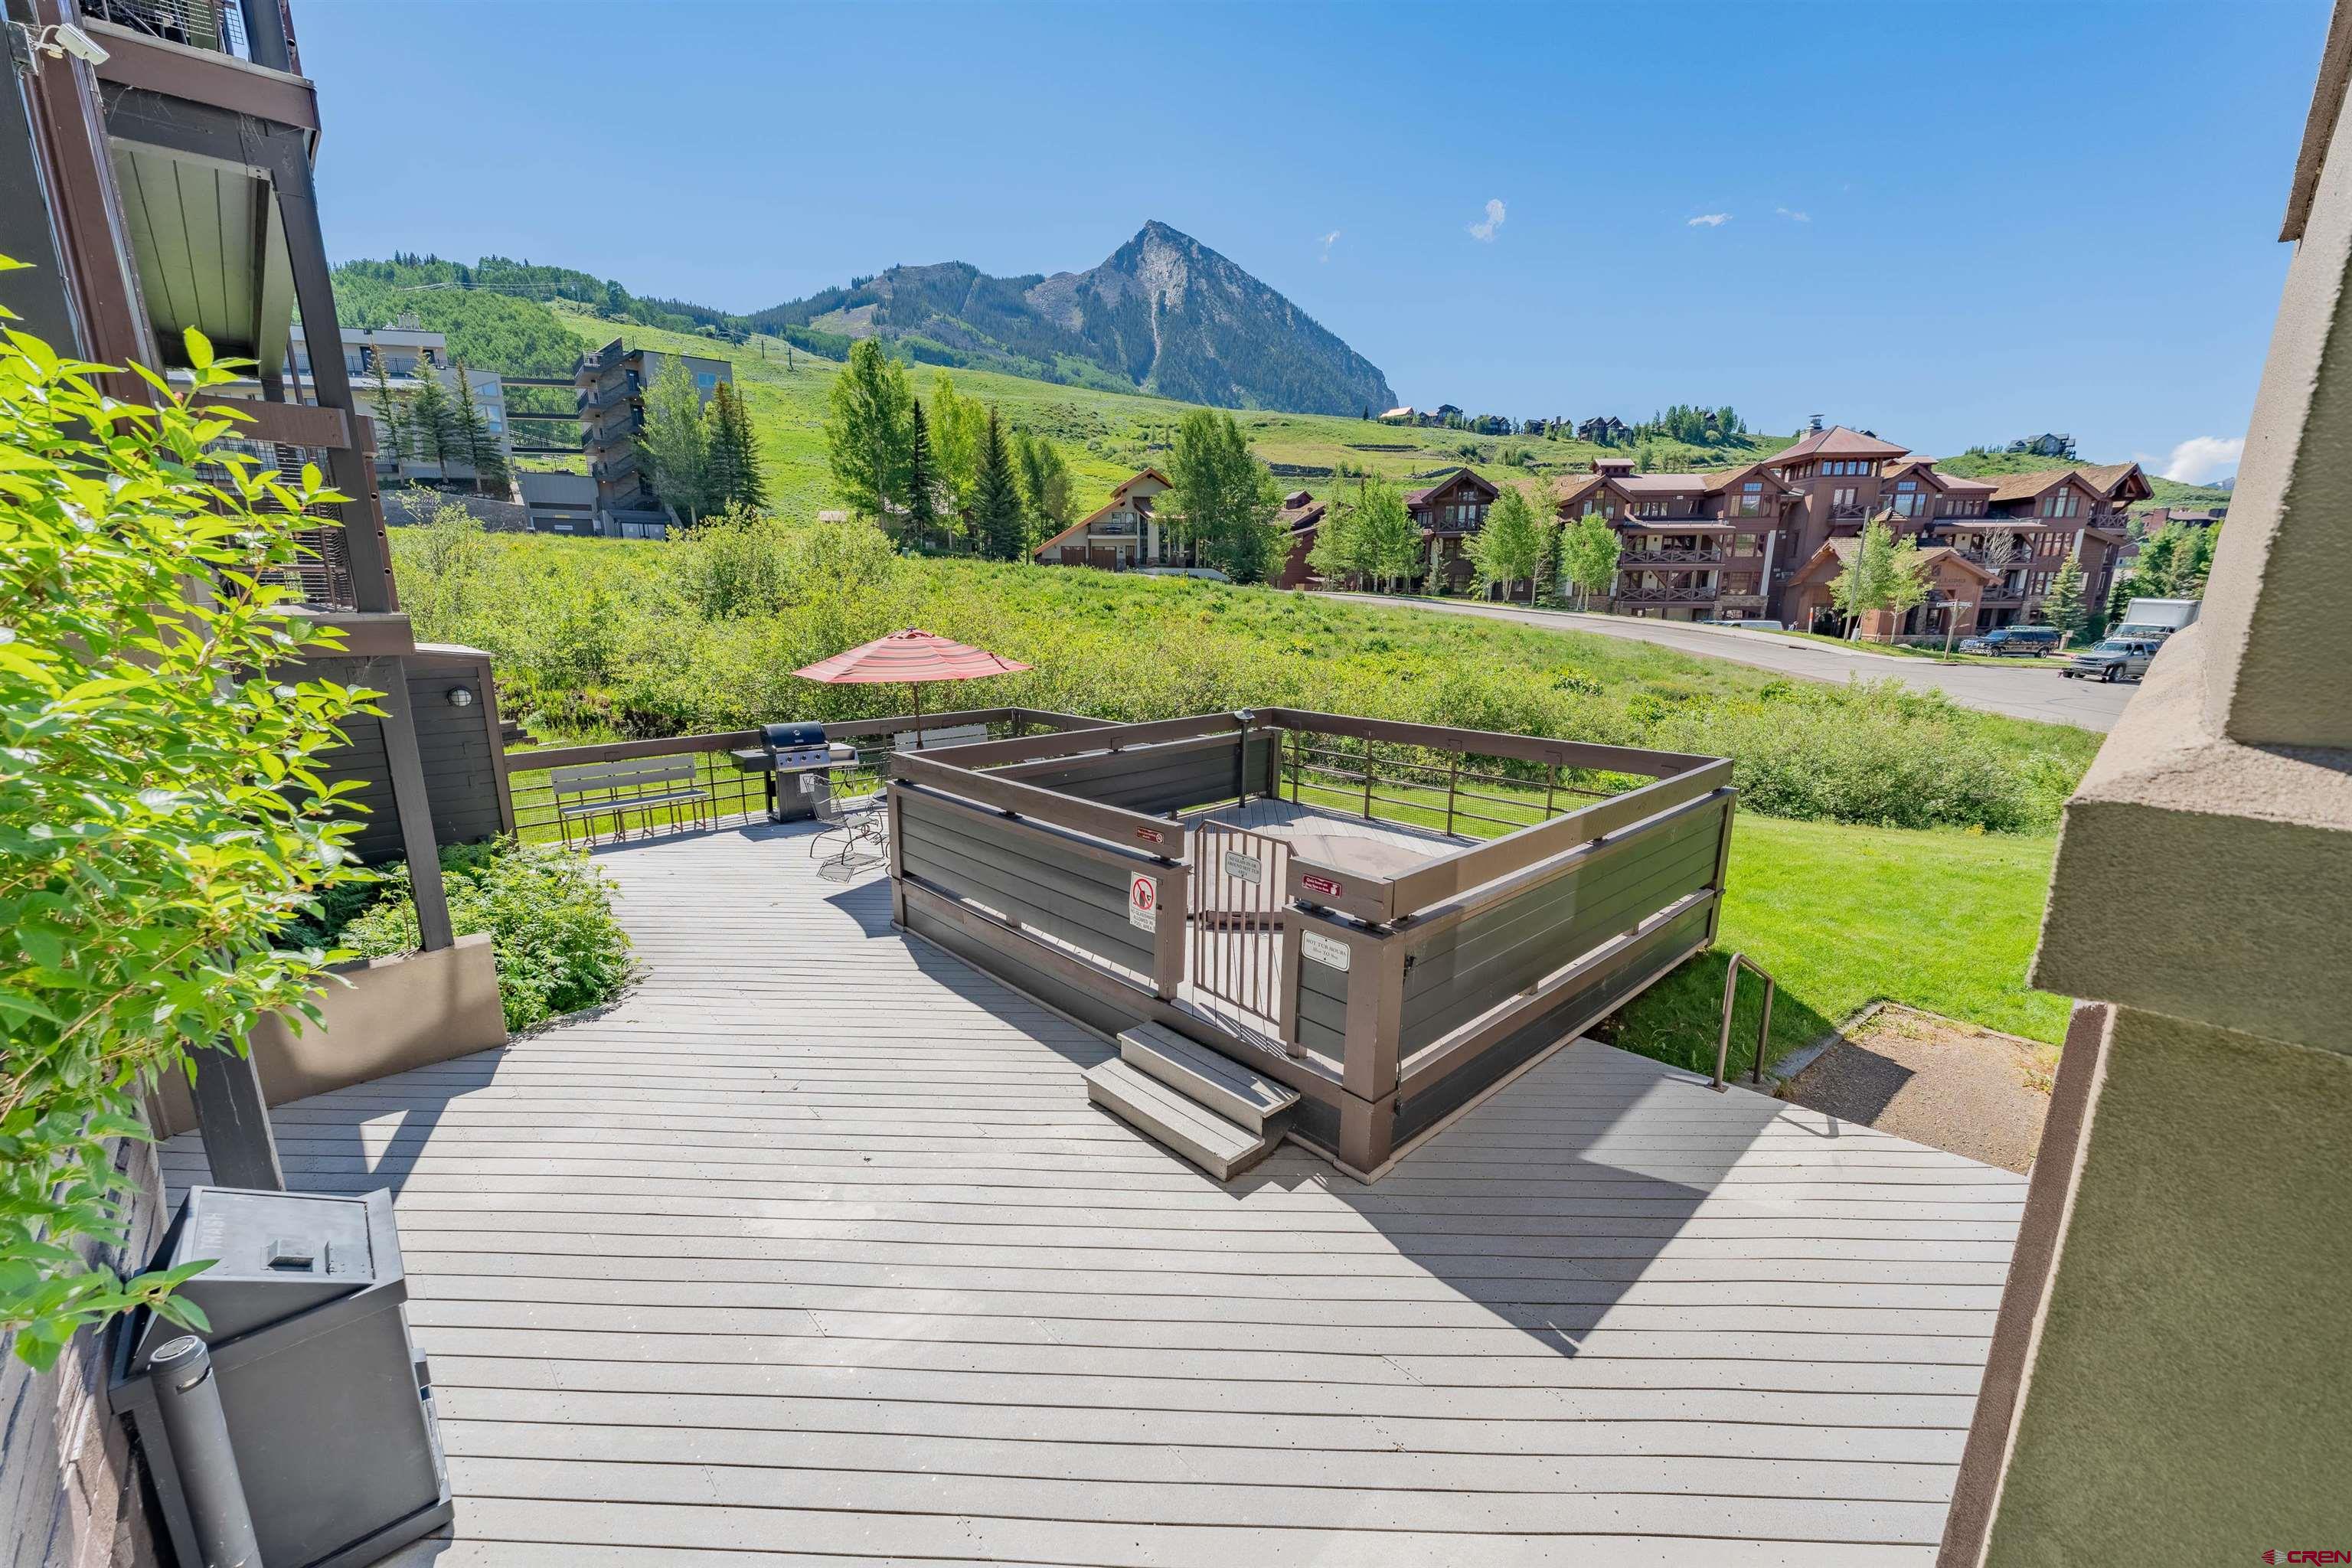 400 Gothic Road, Mt. Crested Butte, CO 81225